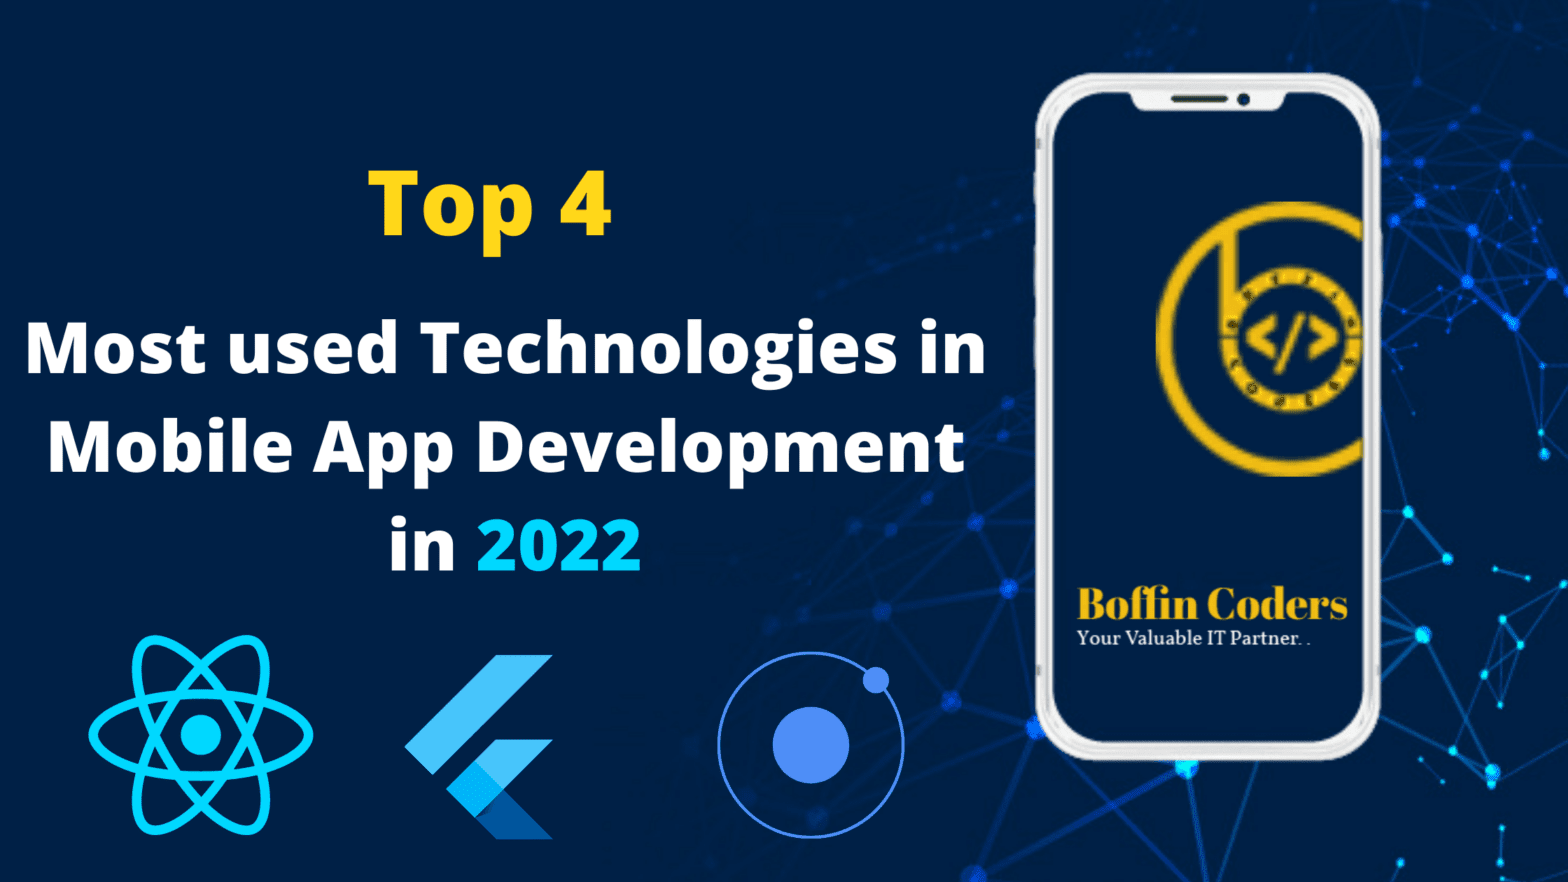 Top 4 Most used Technologies in Mobile App Development in 2022